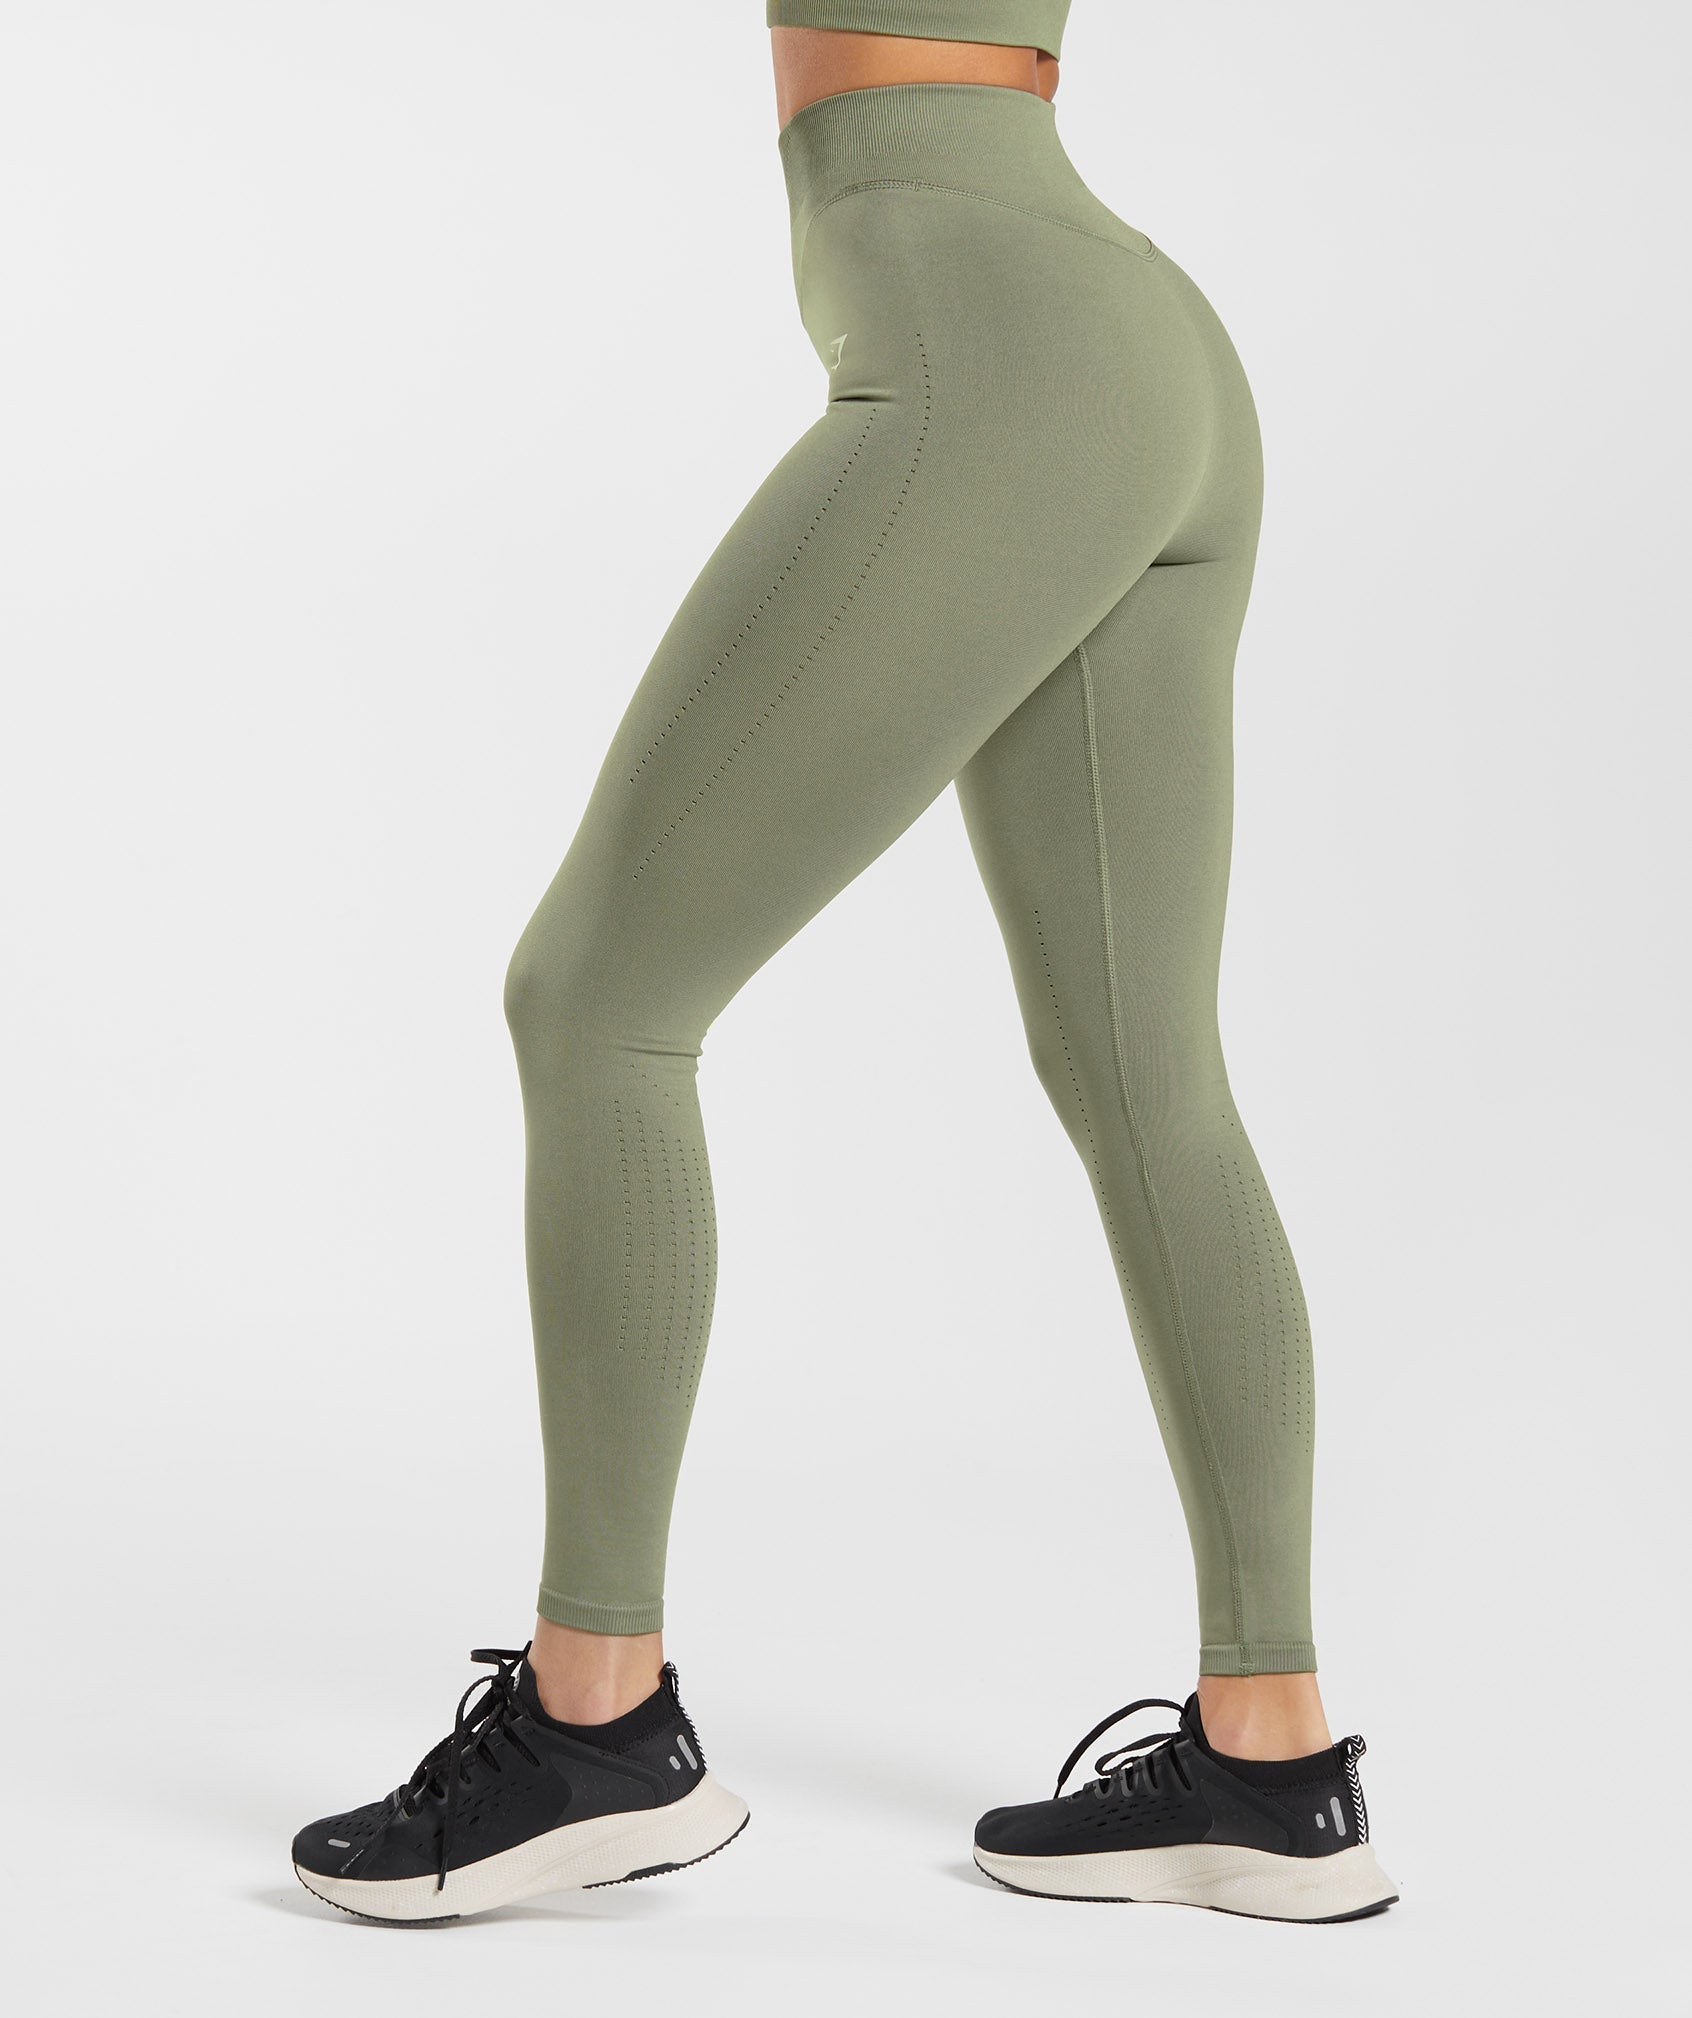 Sweat Seamless Leggings in Dusty Olive - view 5